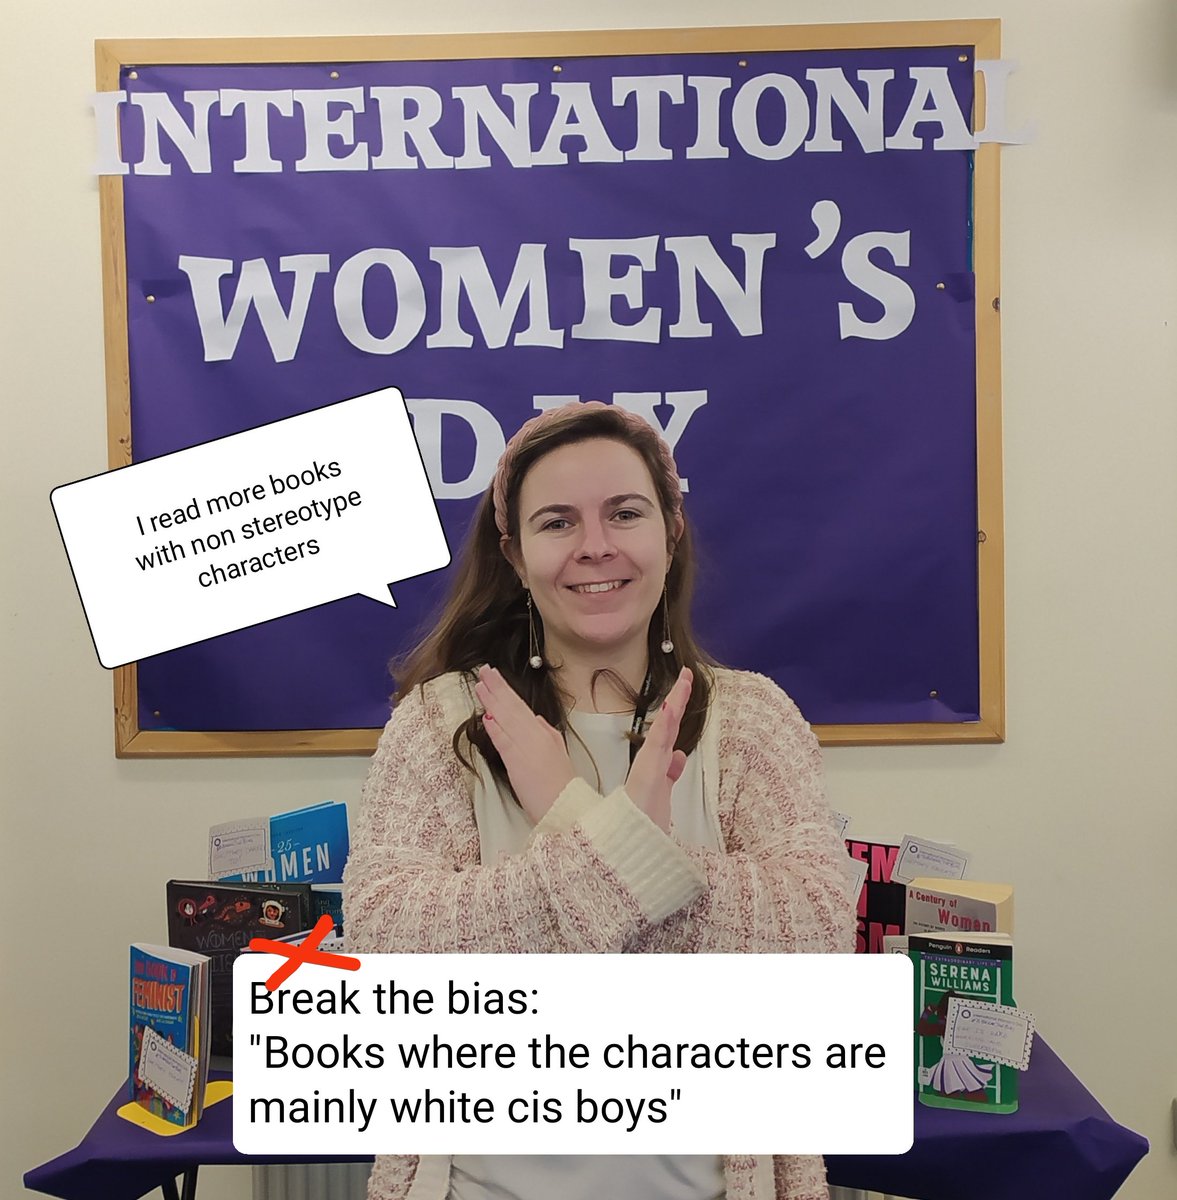 And you, what do you do to #breakthebias?
@EqualitiesEdGCC

#IWD2022
#WomensDay2022 
#Librarydisplay #womenempowerment #powerpose